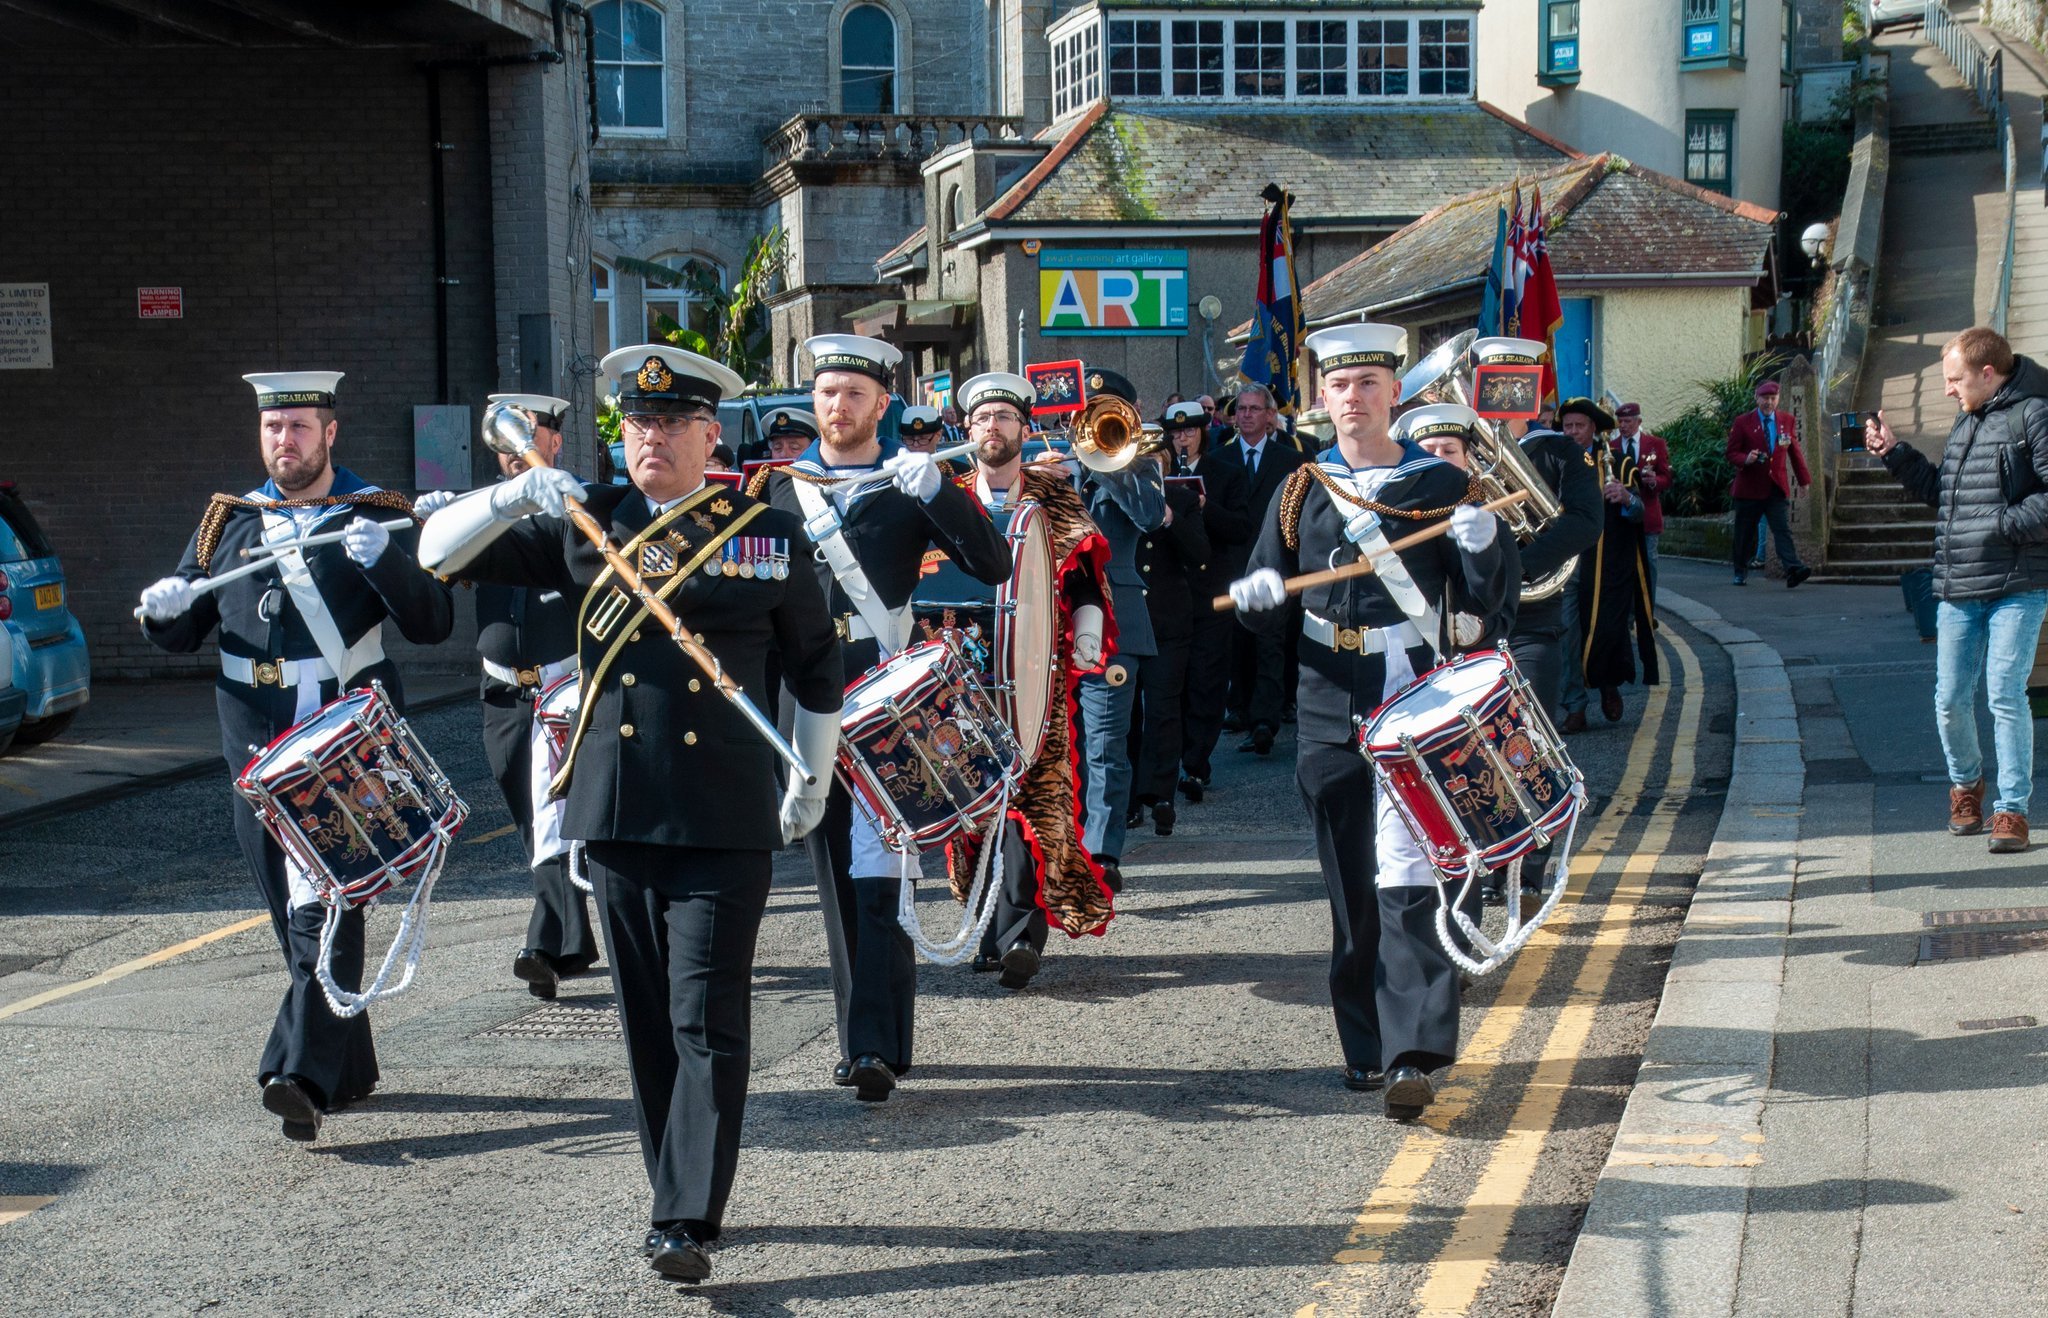 Parading through the town. Picture: Jory Munday